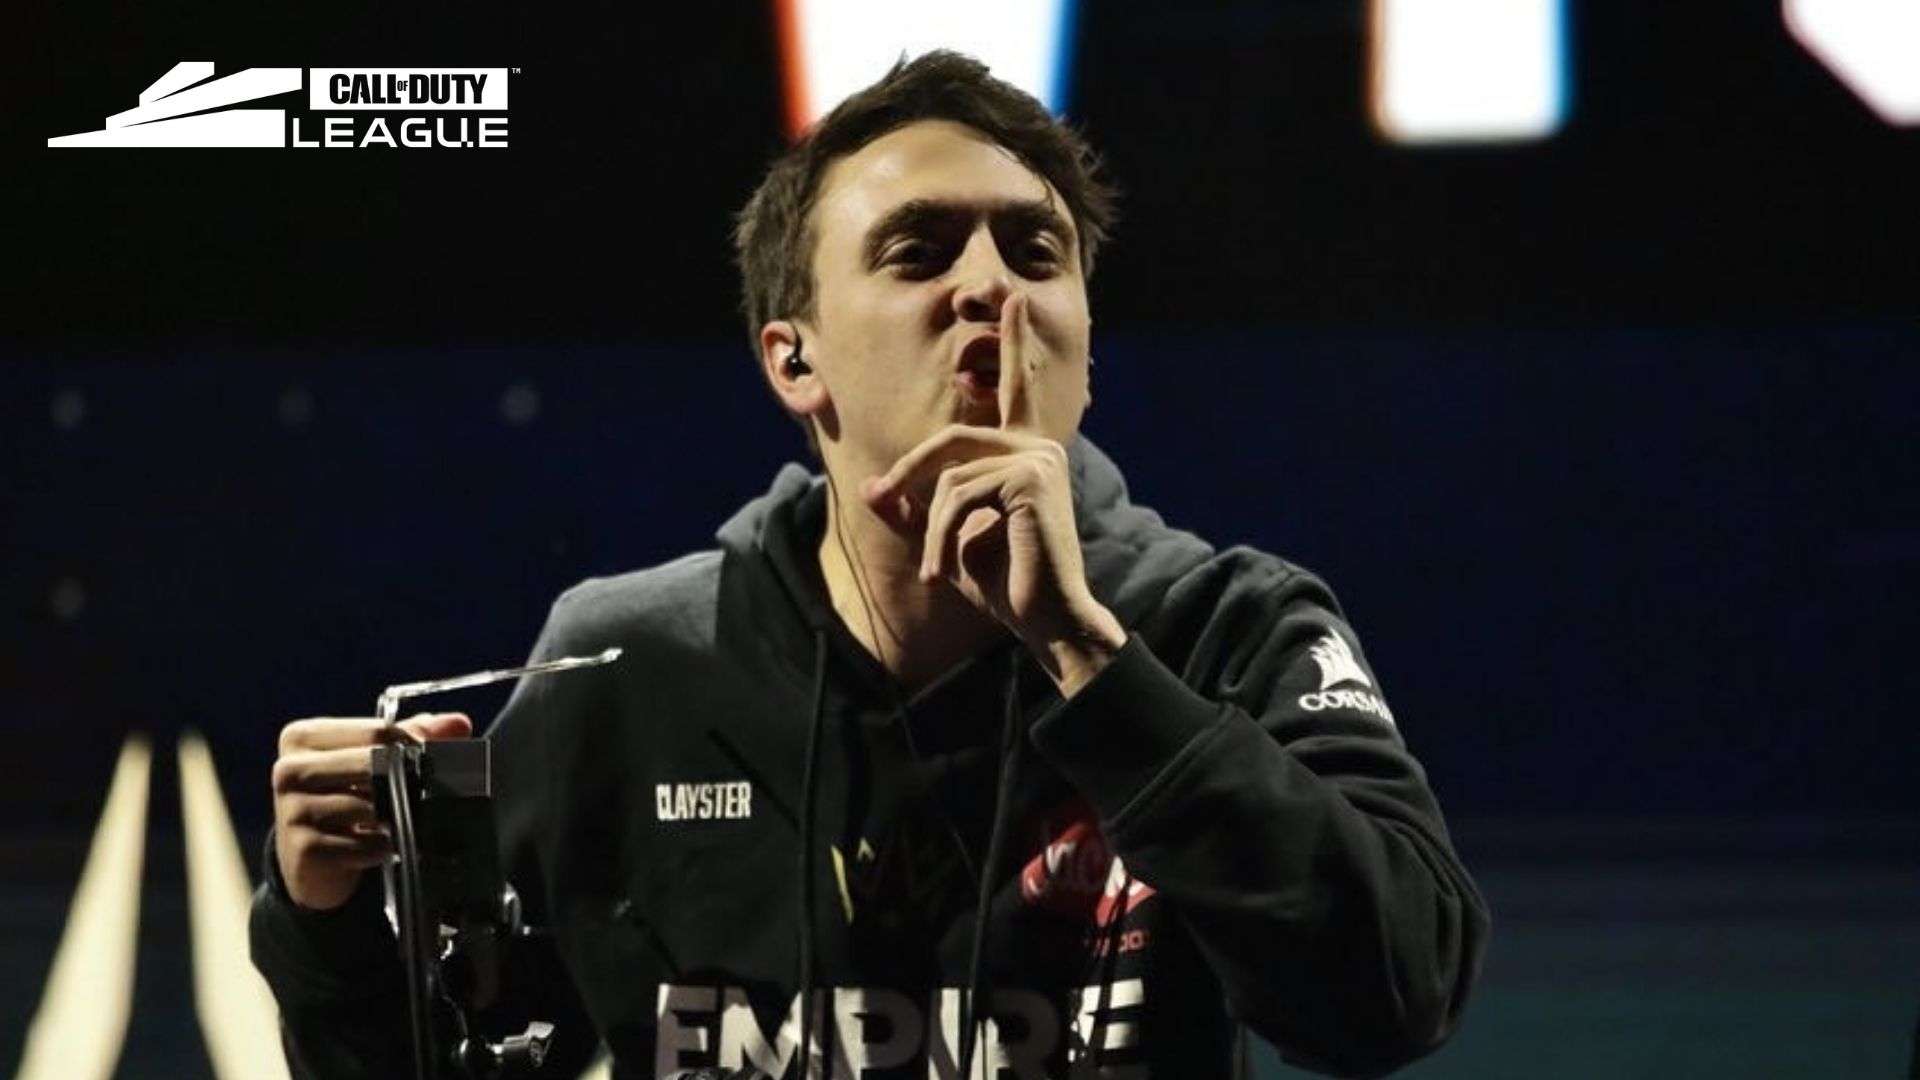 clayster rostermania